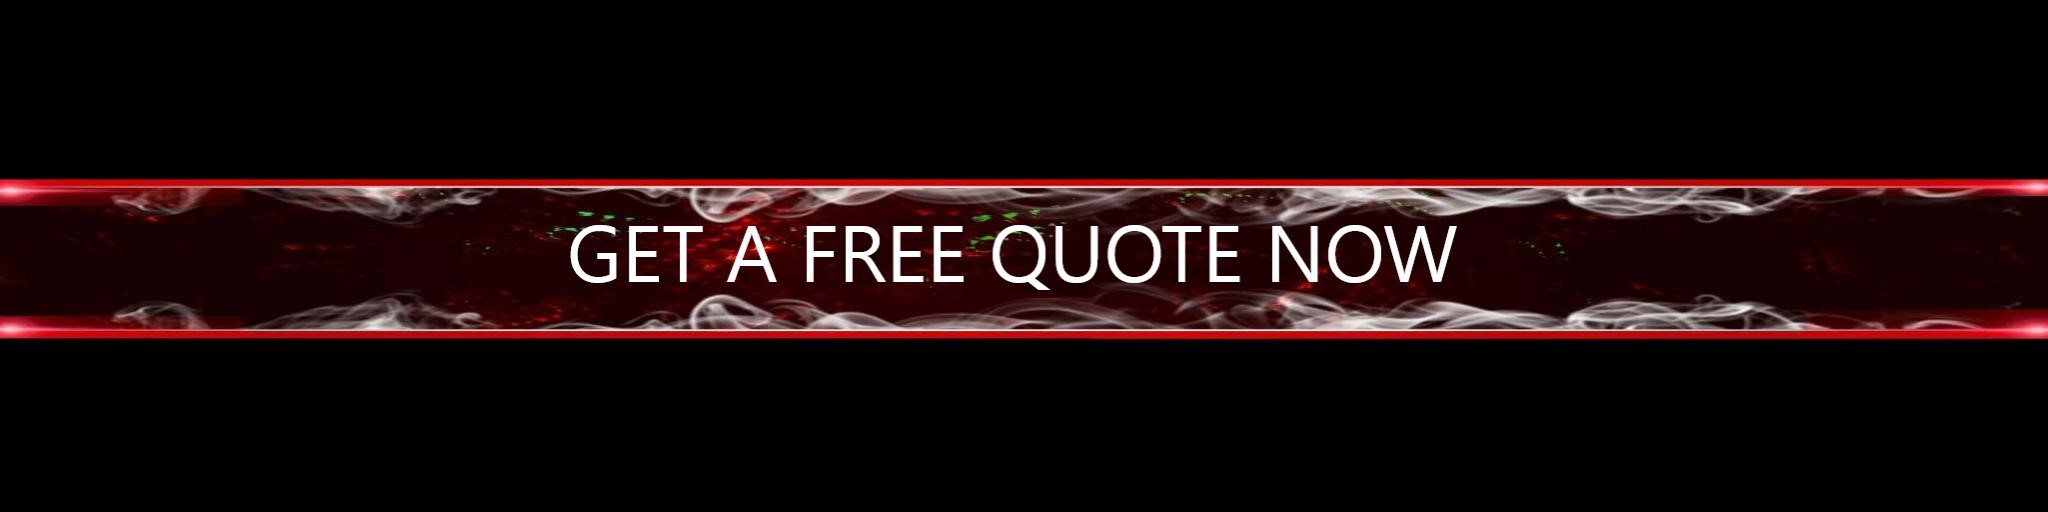 Get a Free Quote Now